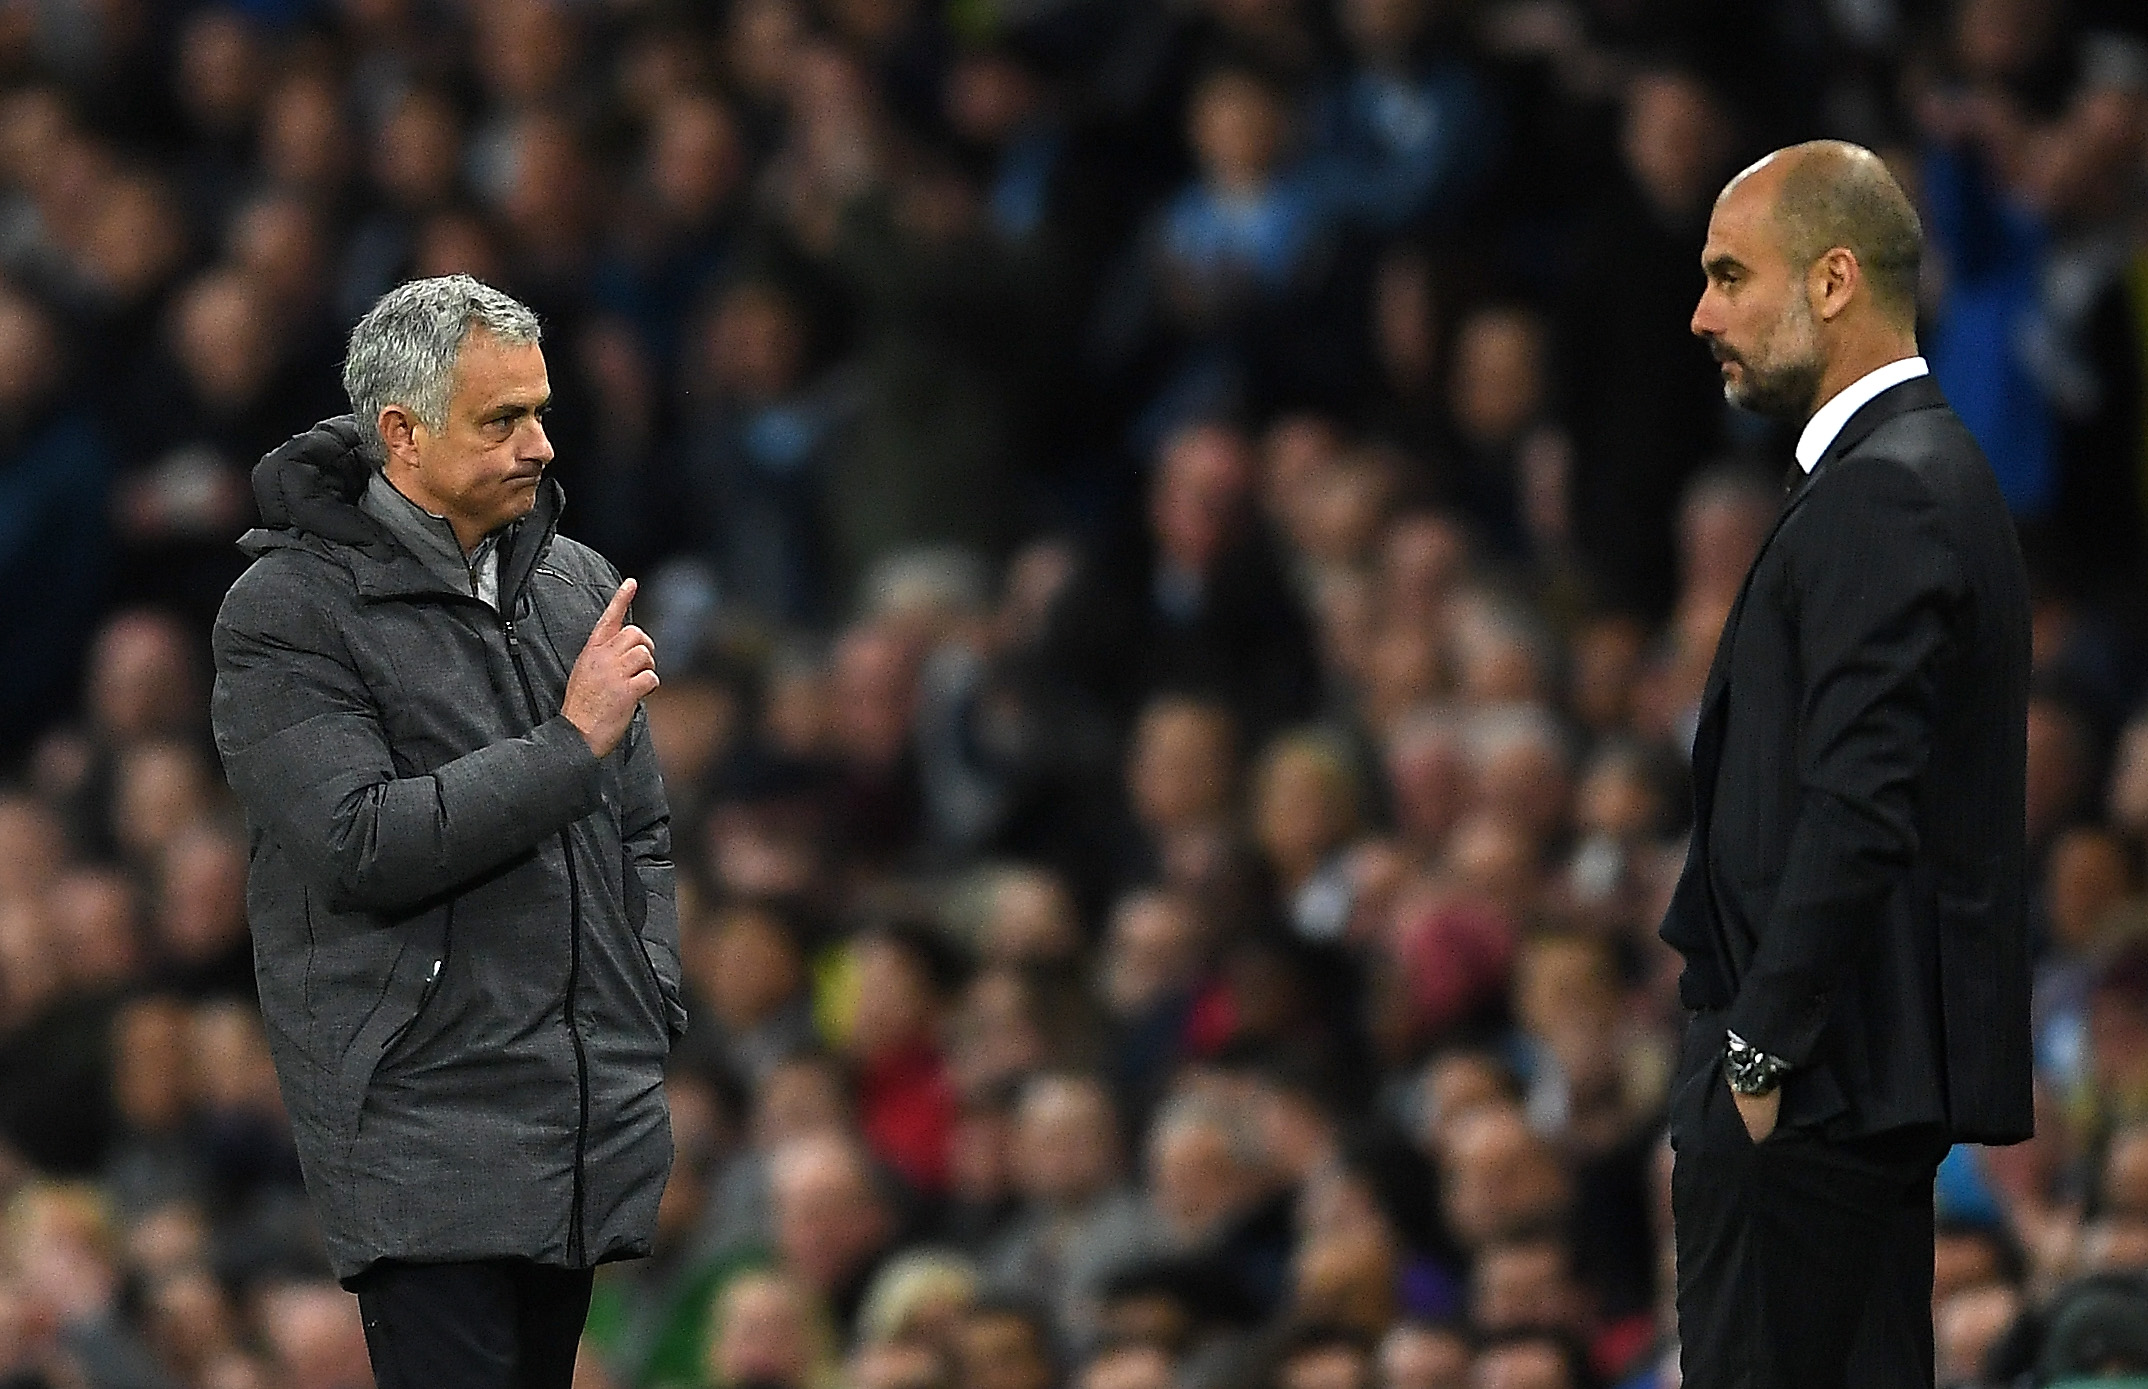 MANCHESTER, ENGLAND - APRIL 27: Jose Mourinho, Manager of Manchester United (L) and Josep Guardiola, Manager of Manchester City (R) during the Premier League match between Manchester City and Manchester United at Etihad Stadium on April 27, 2017 in Manchester, England.  (Photo by Laurence Griffiths/Getty Images)